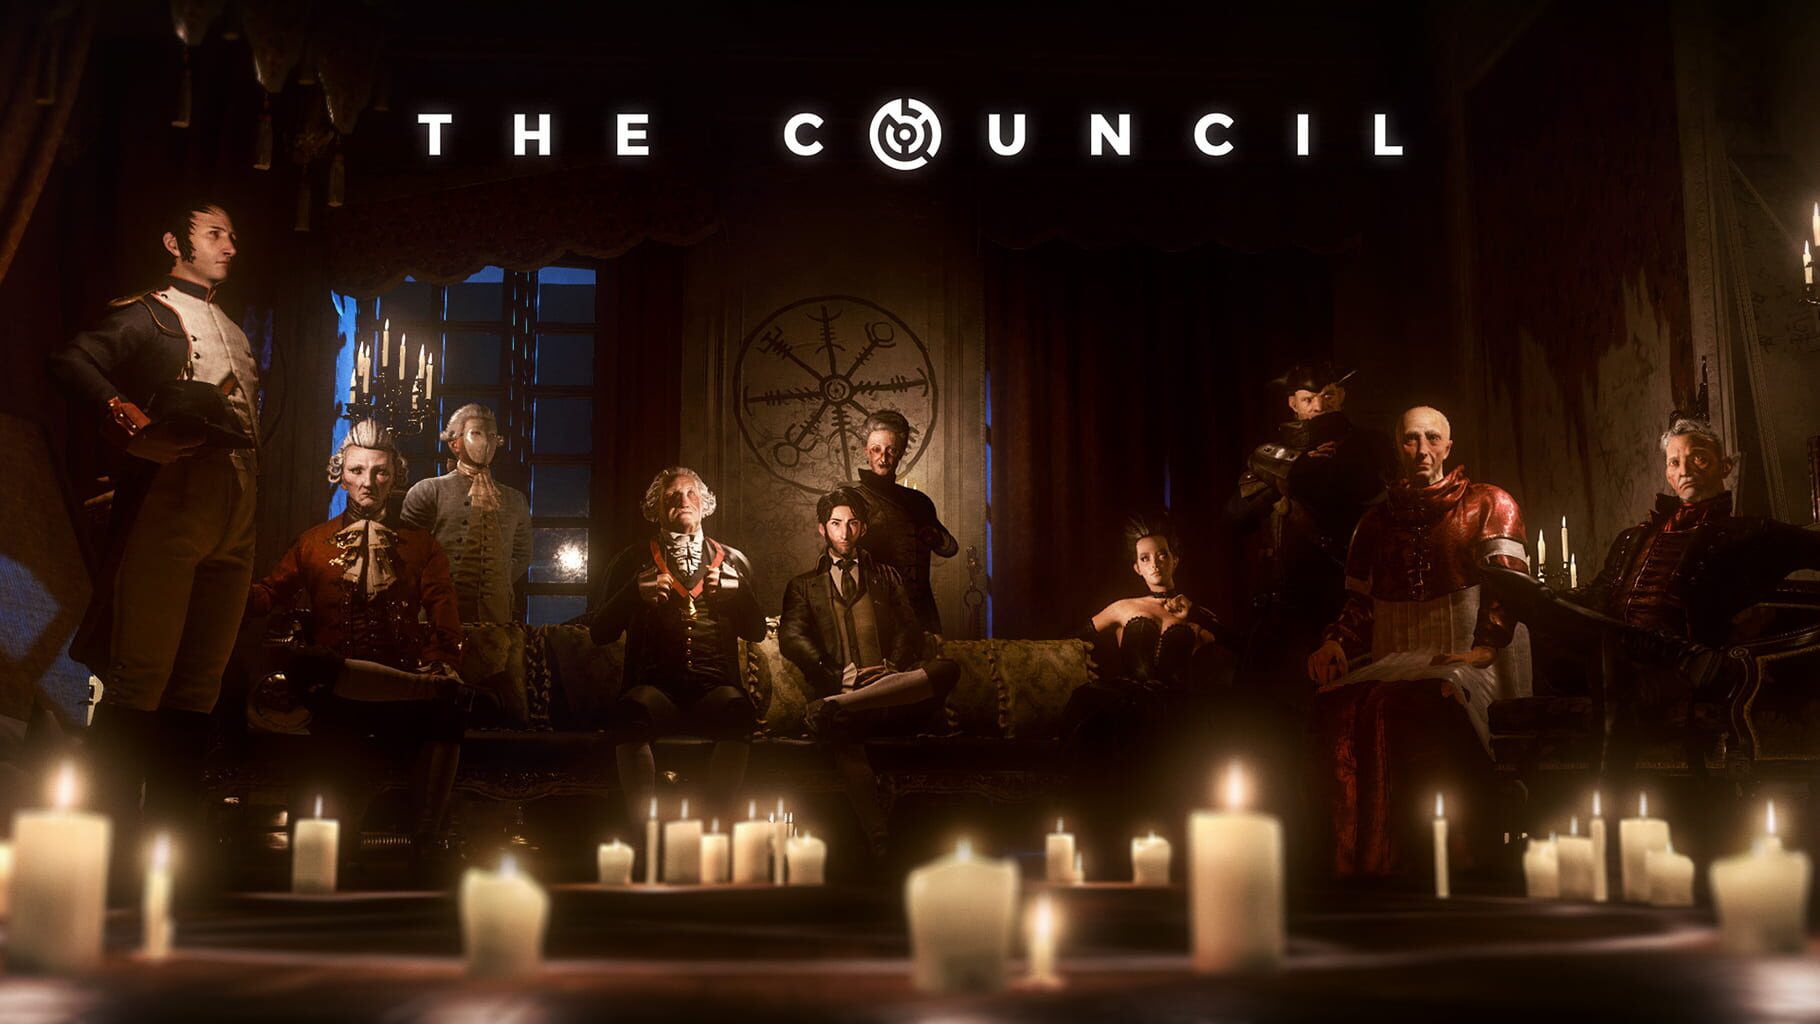 Artwork for The Council